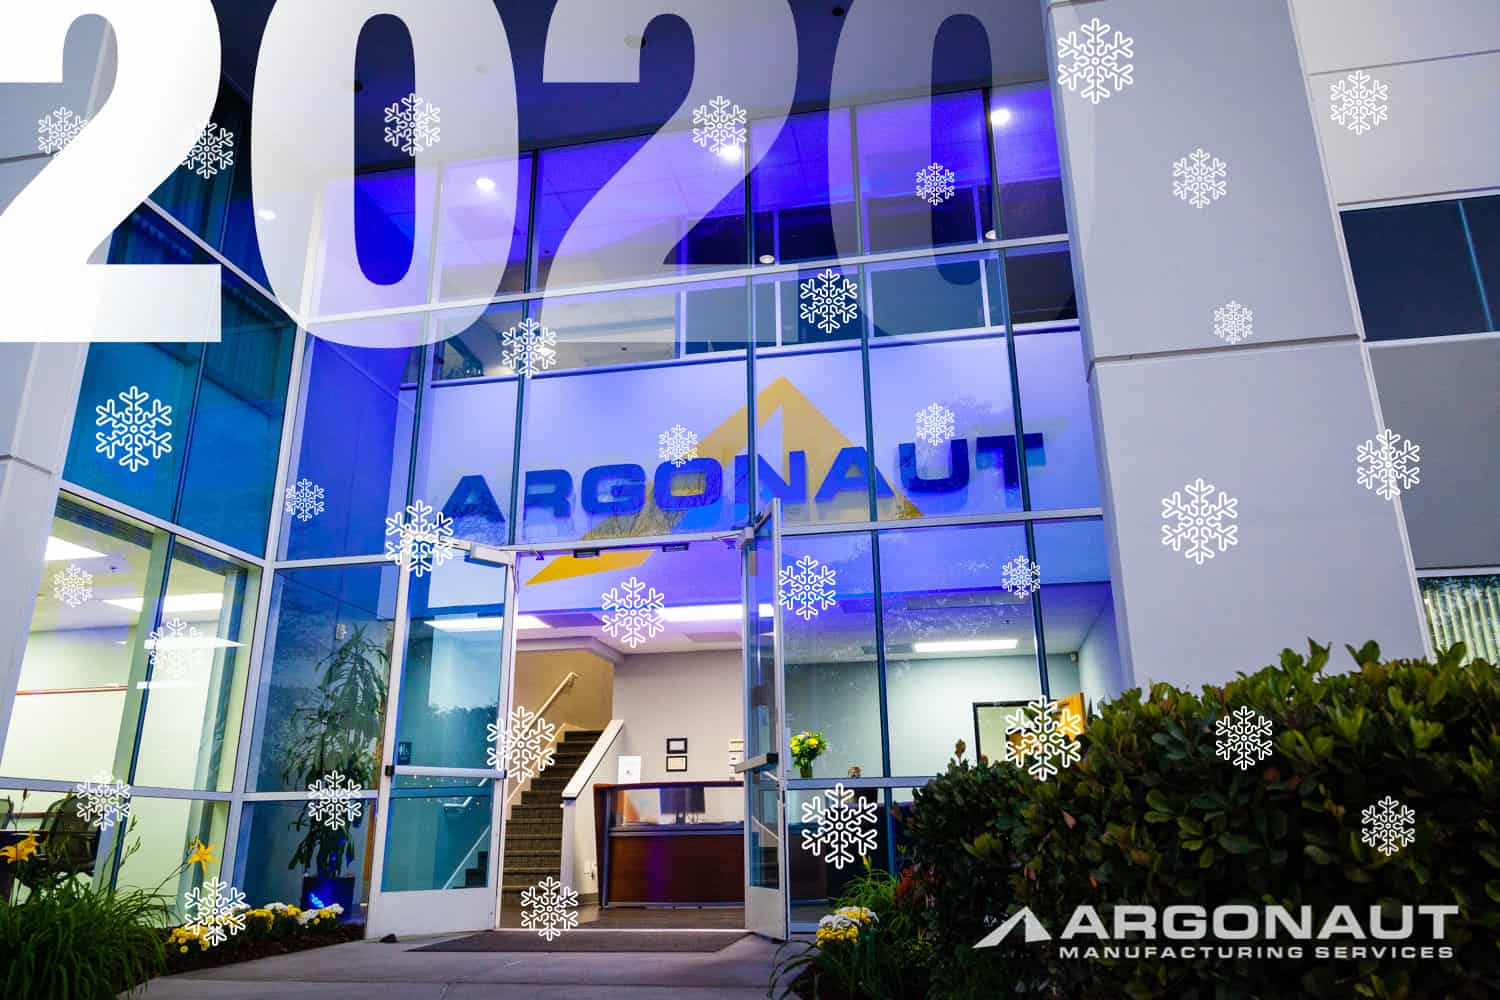 Best of Argonaut in 2020 - our first cGMP run and more